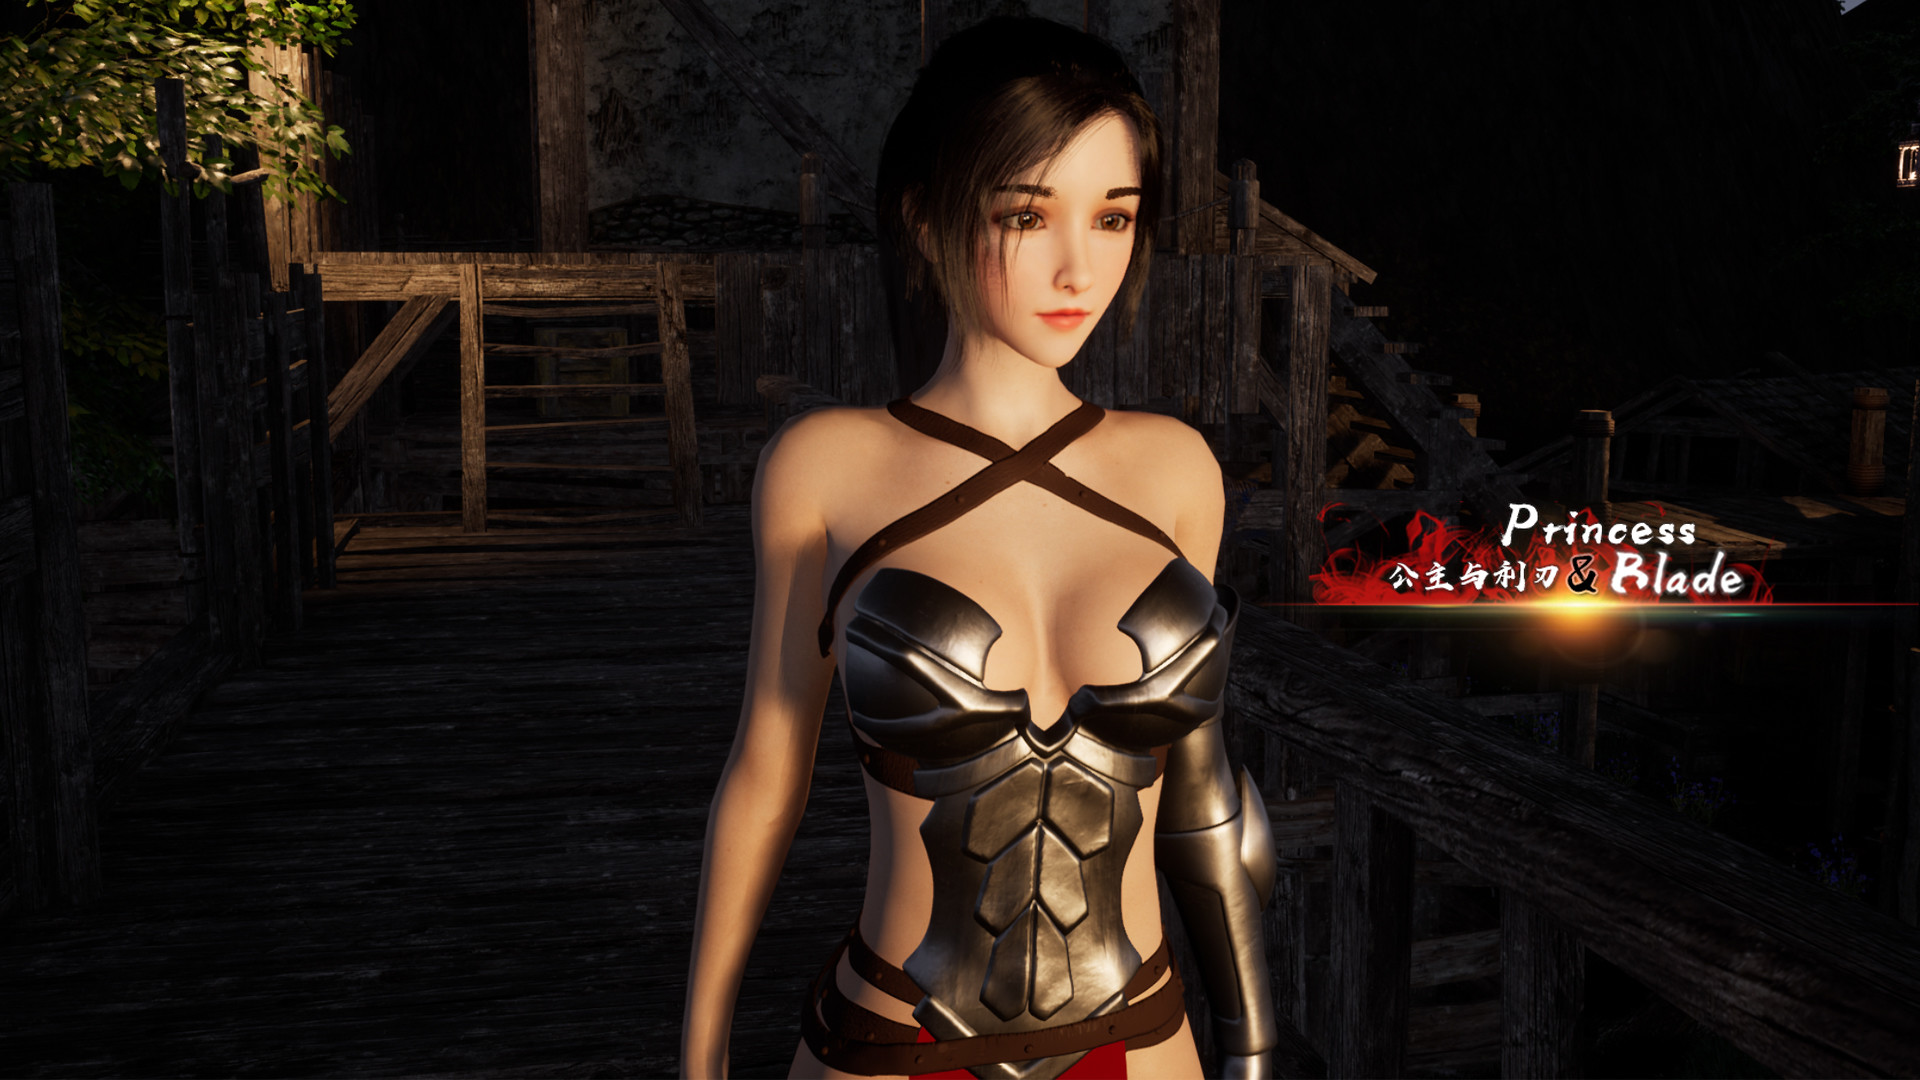 First Nude Mod released for Assassin's Creed Valhalla